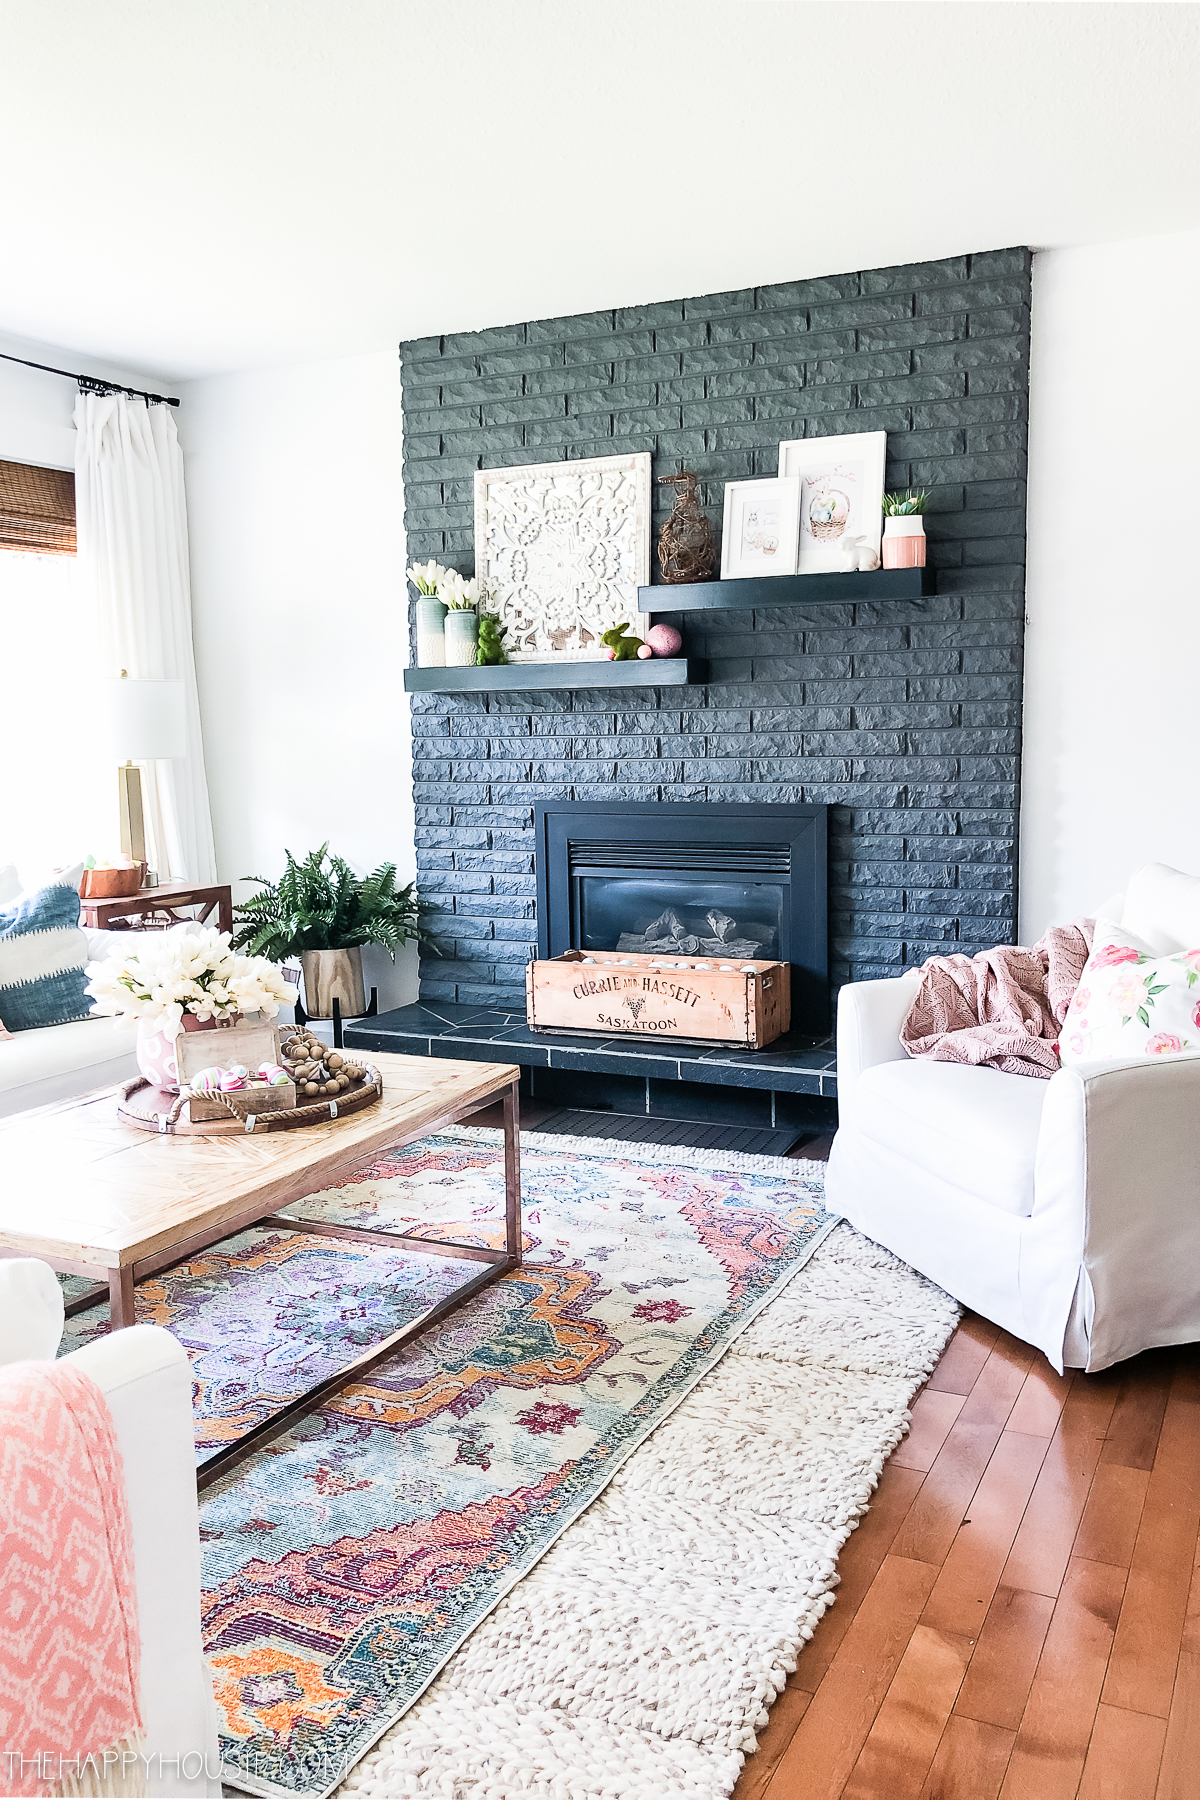 Soft living room colours with a gray painted fireplace brick.